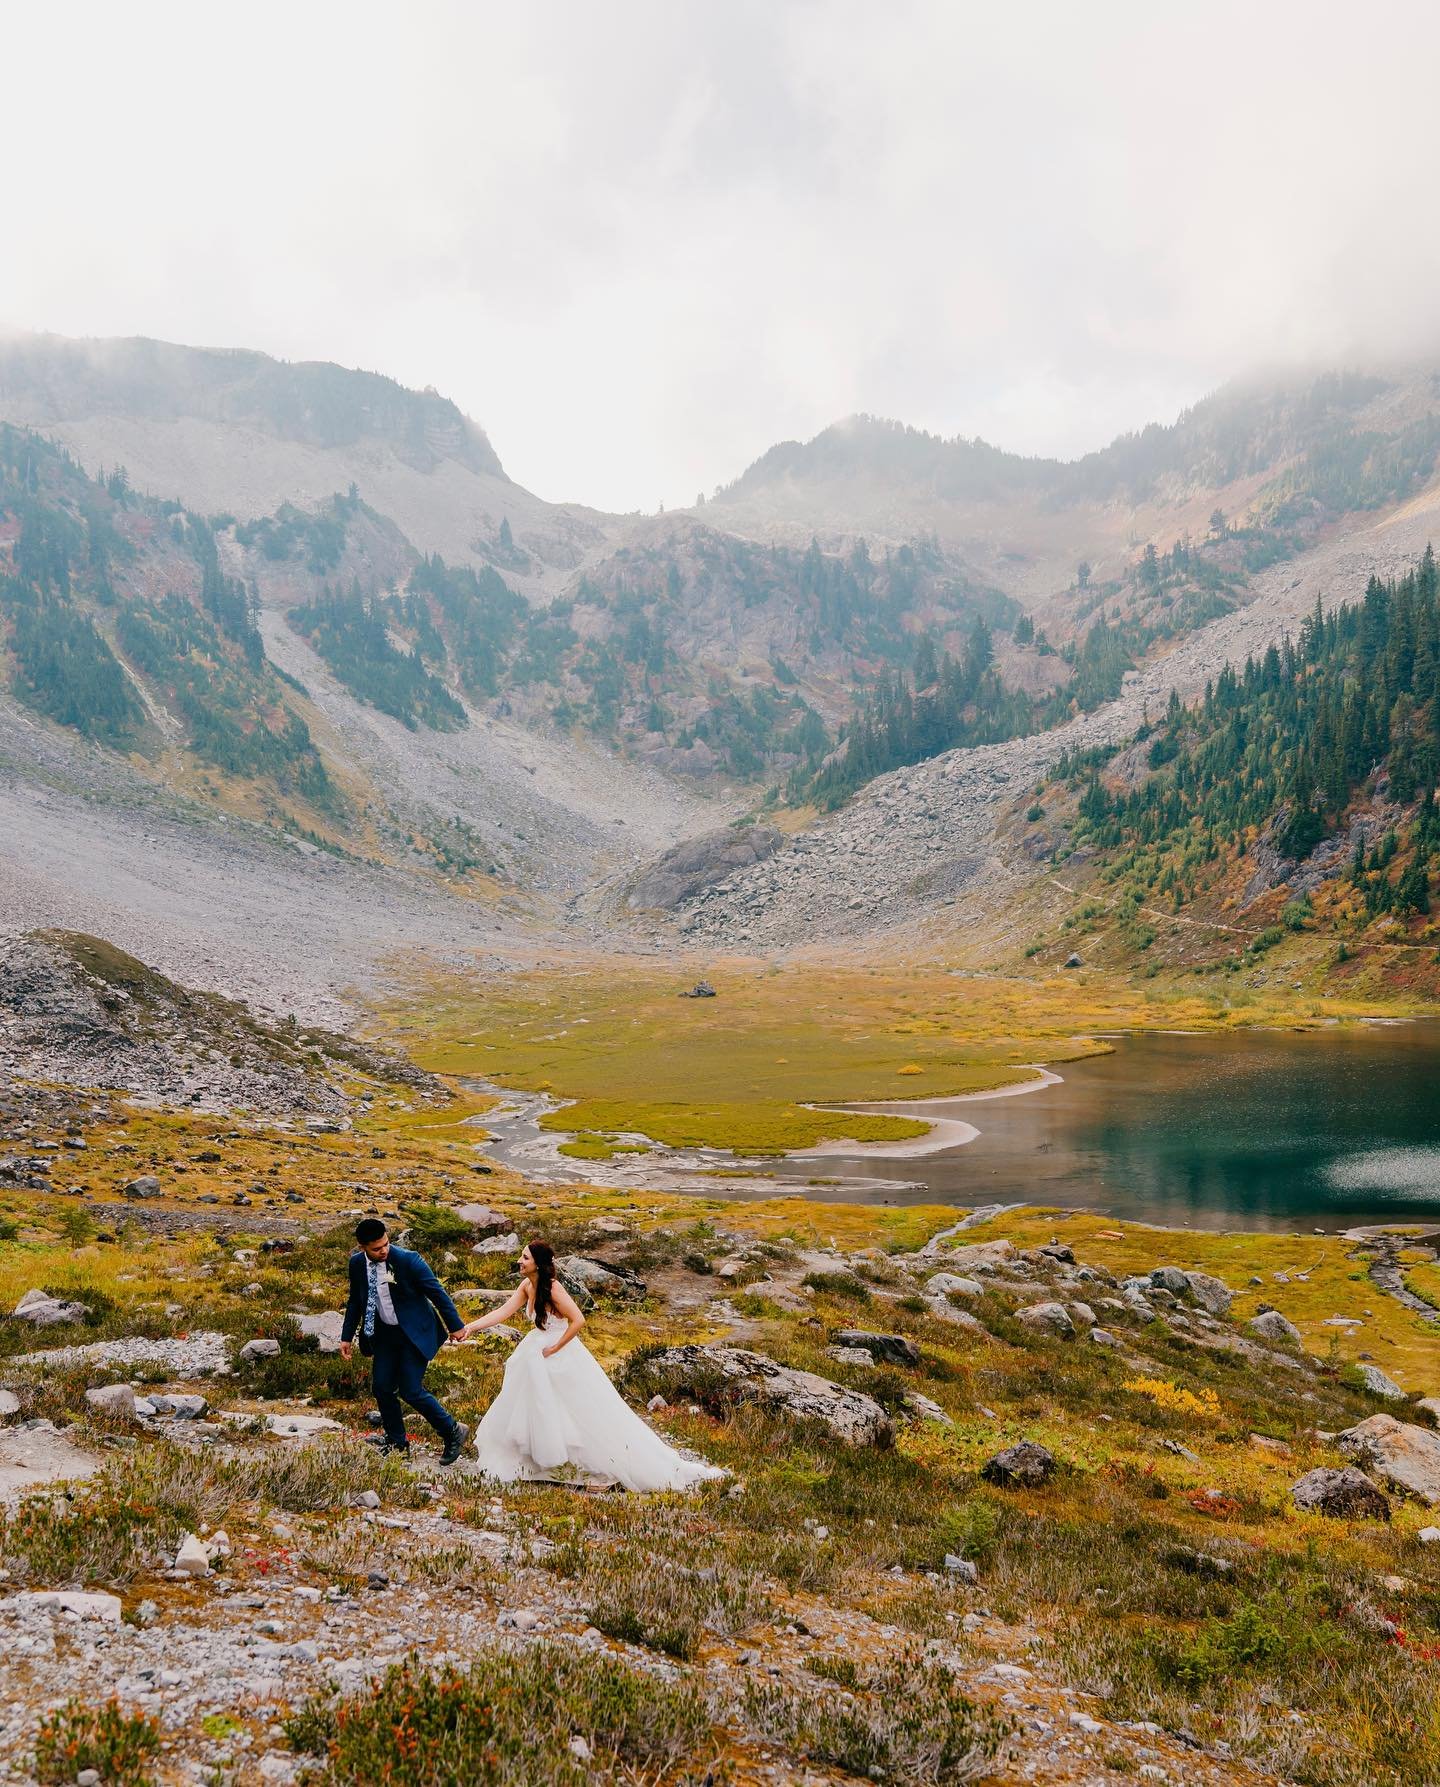 Let's address the elephant in the room: the affordability of an adventure elopement. Many people view this type of wedding as a cost-effective option. While it's indeed more budget-friendly than a traditional wedding, it's important to recognize the 